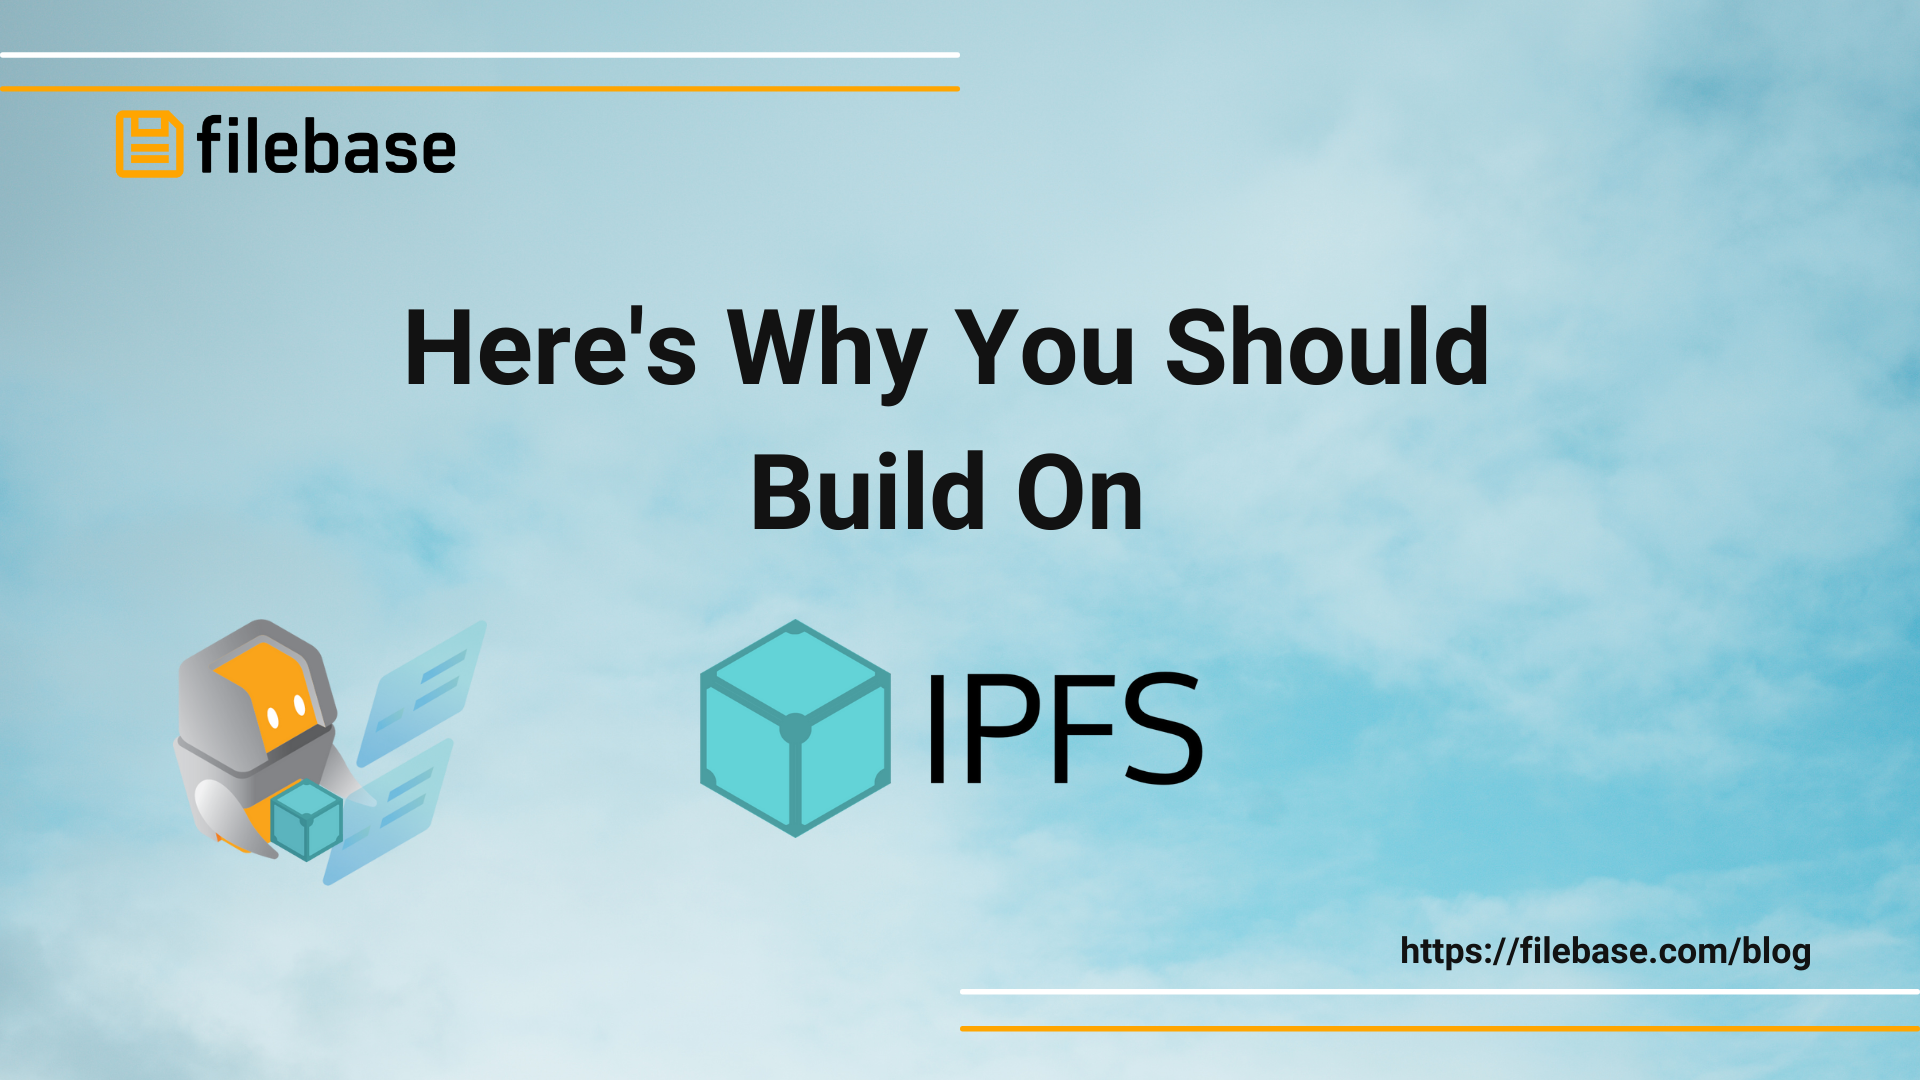 Here's Why You Should Build On IPFS